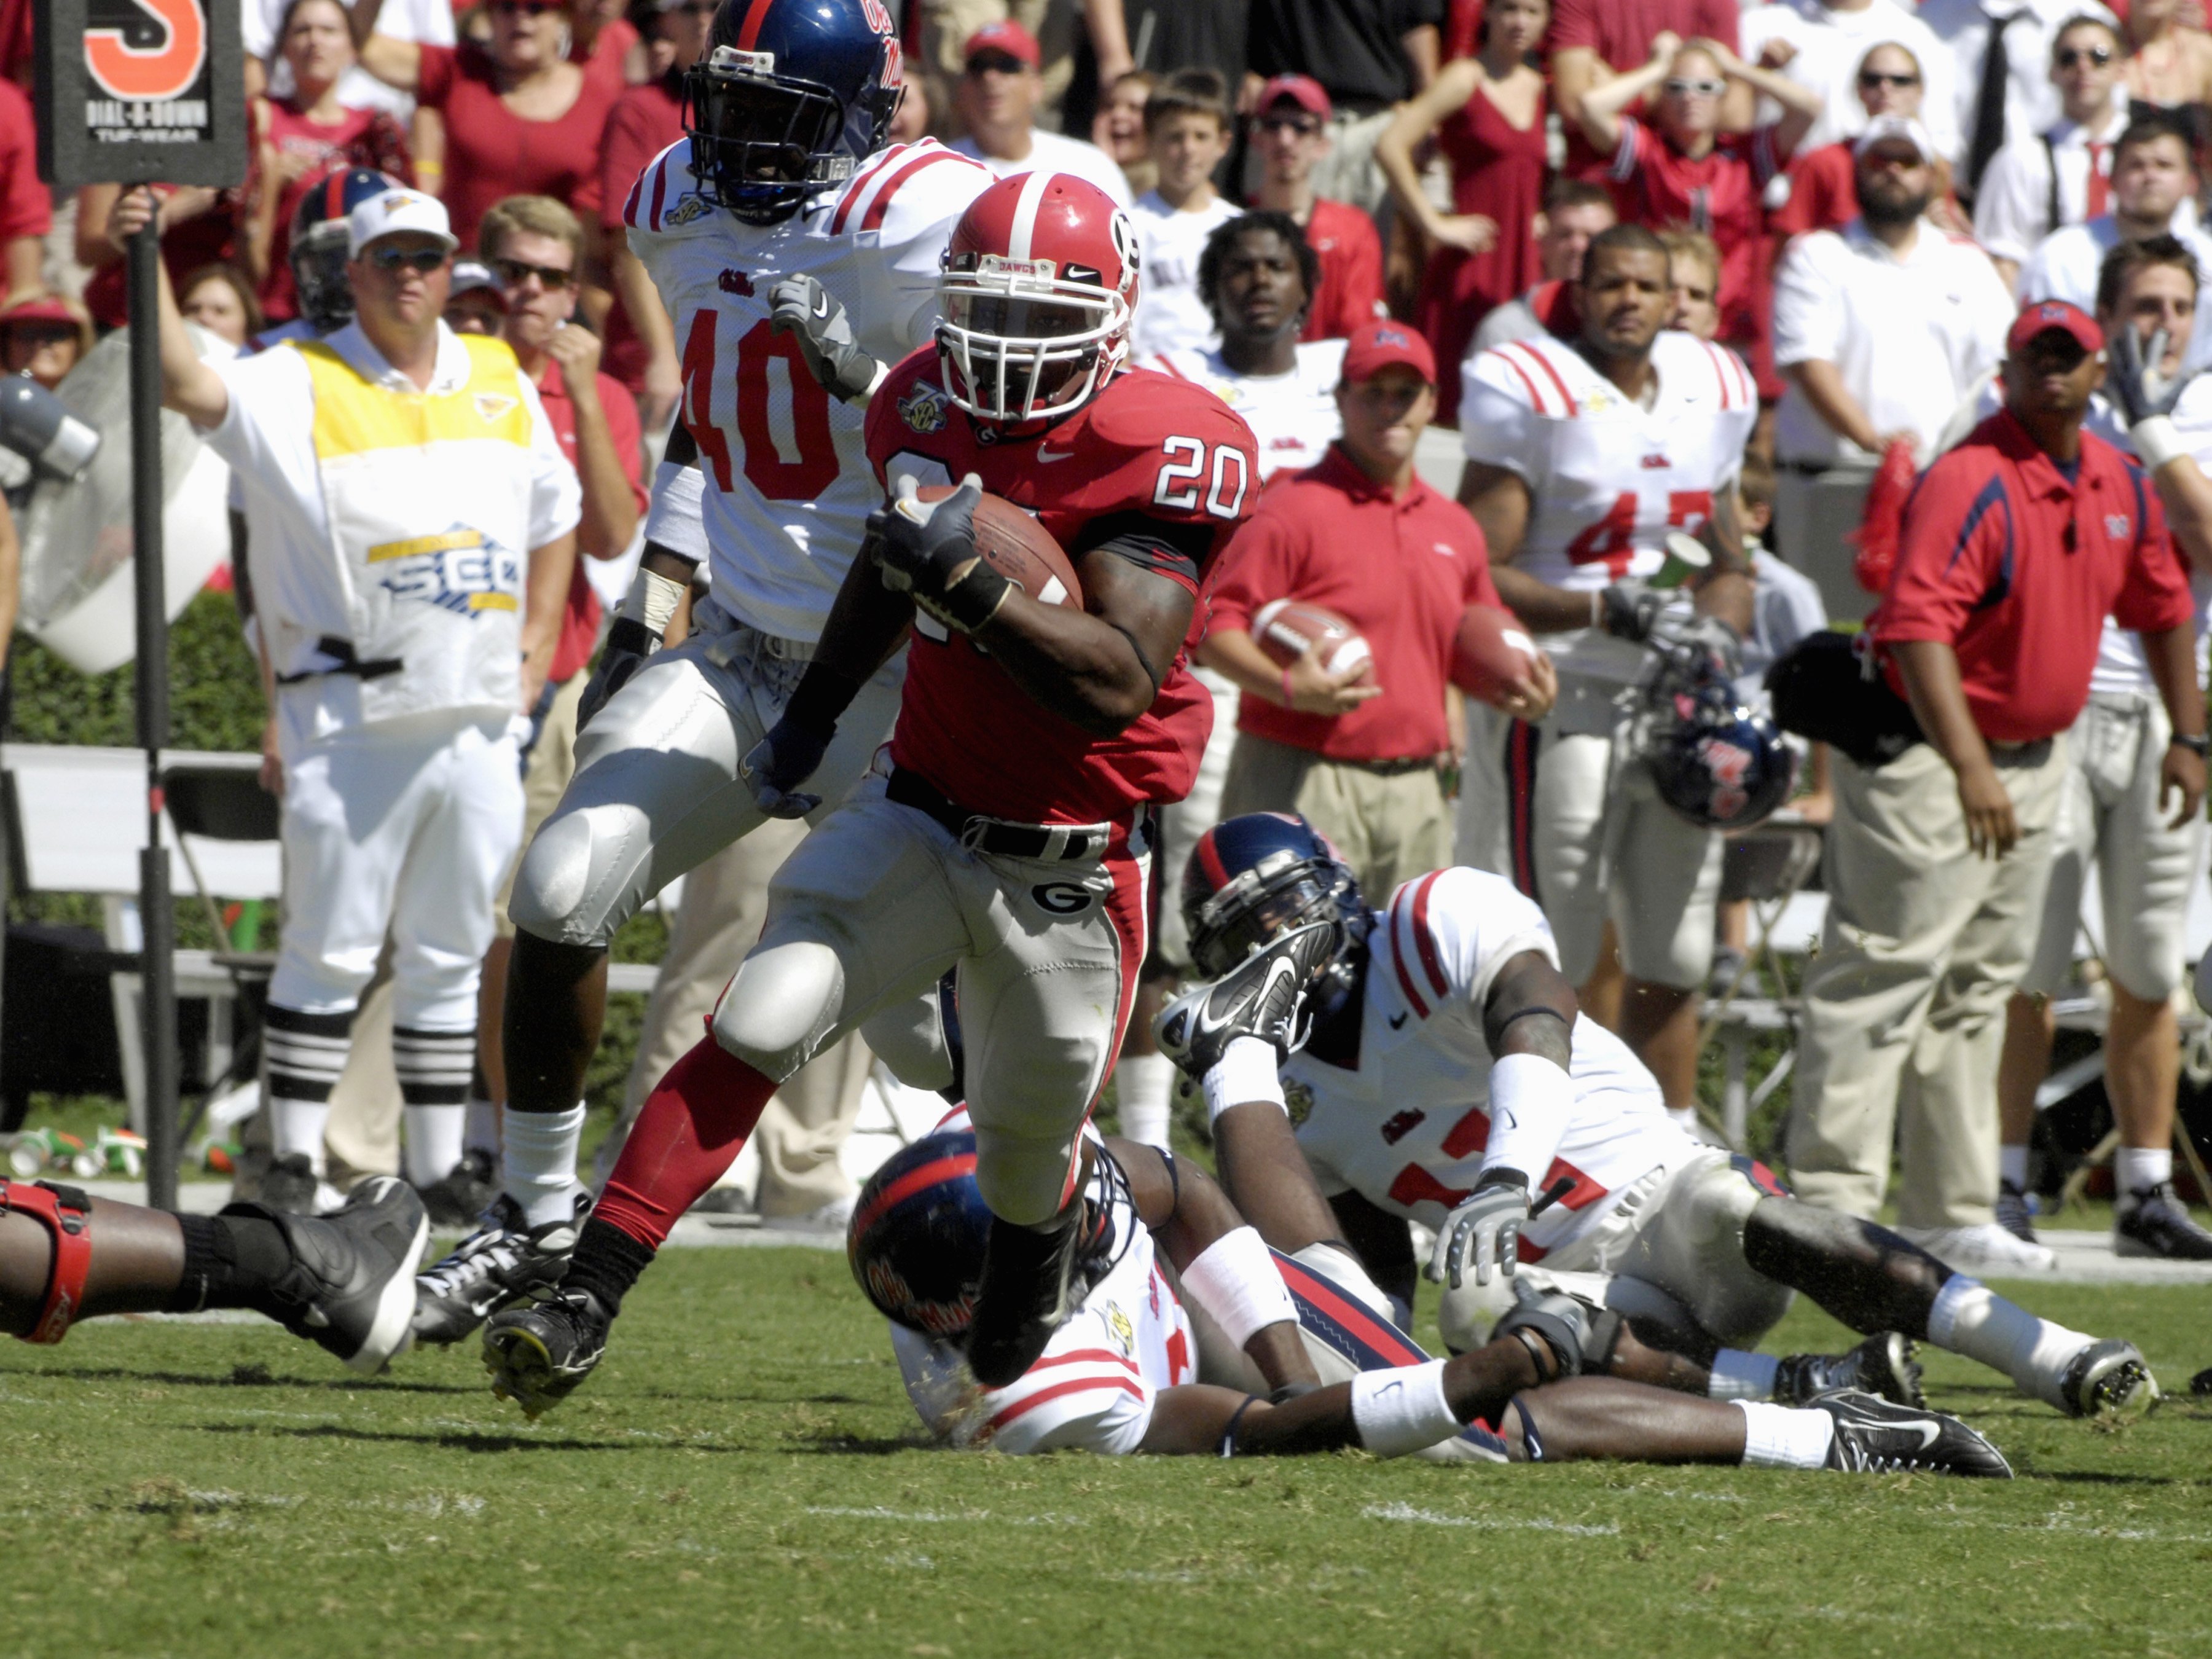 ATHENS, GA - SEPTEMBER 29: Running back Thomas Brown #20 of  the Georgia Bulldogs rushes for a 38-yard touchdown against the Mississippi Rebels at Sanford Stadium on September 29, 2007 in Athens, Georgia.  (Photo by Al Messerschmidt/Getty Images)